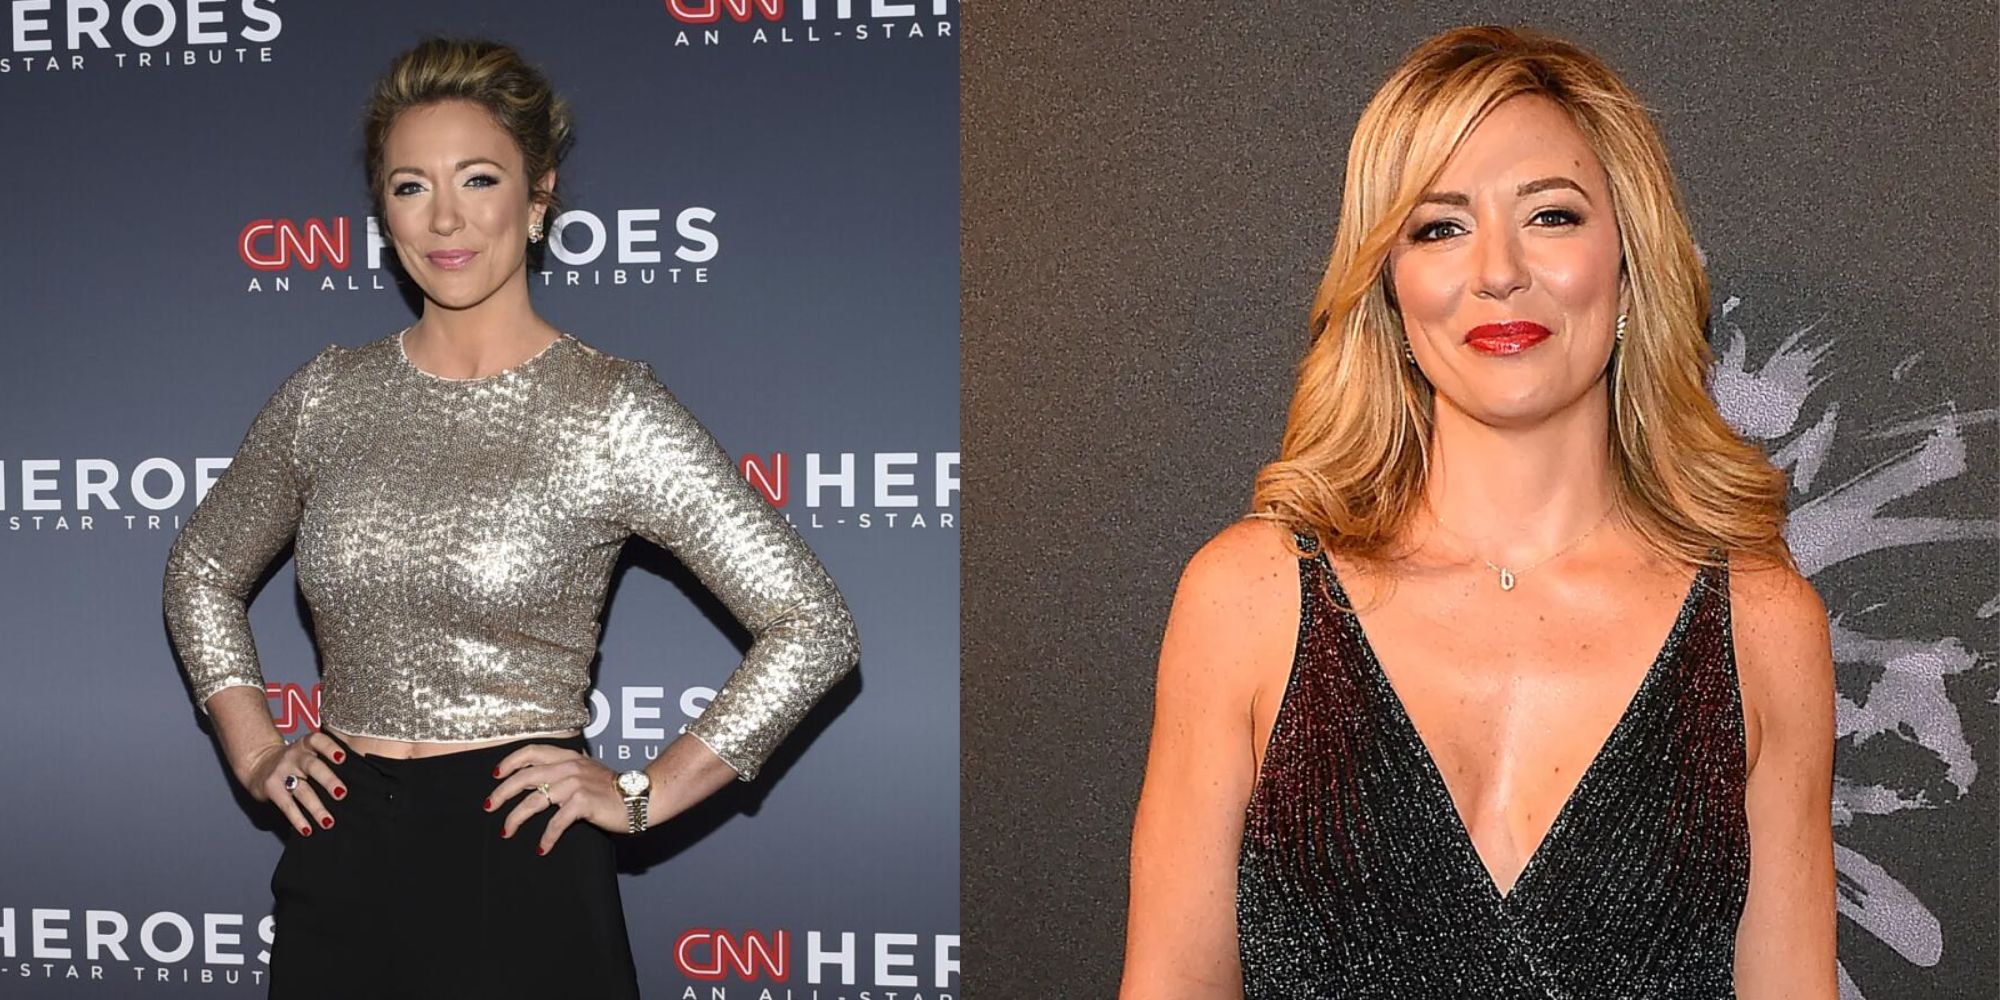 Why Did Brooke Baldwin Leave CNN? Did She Reveal Her Plans Moving Forward?